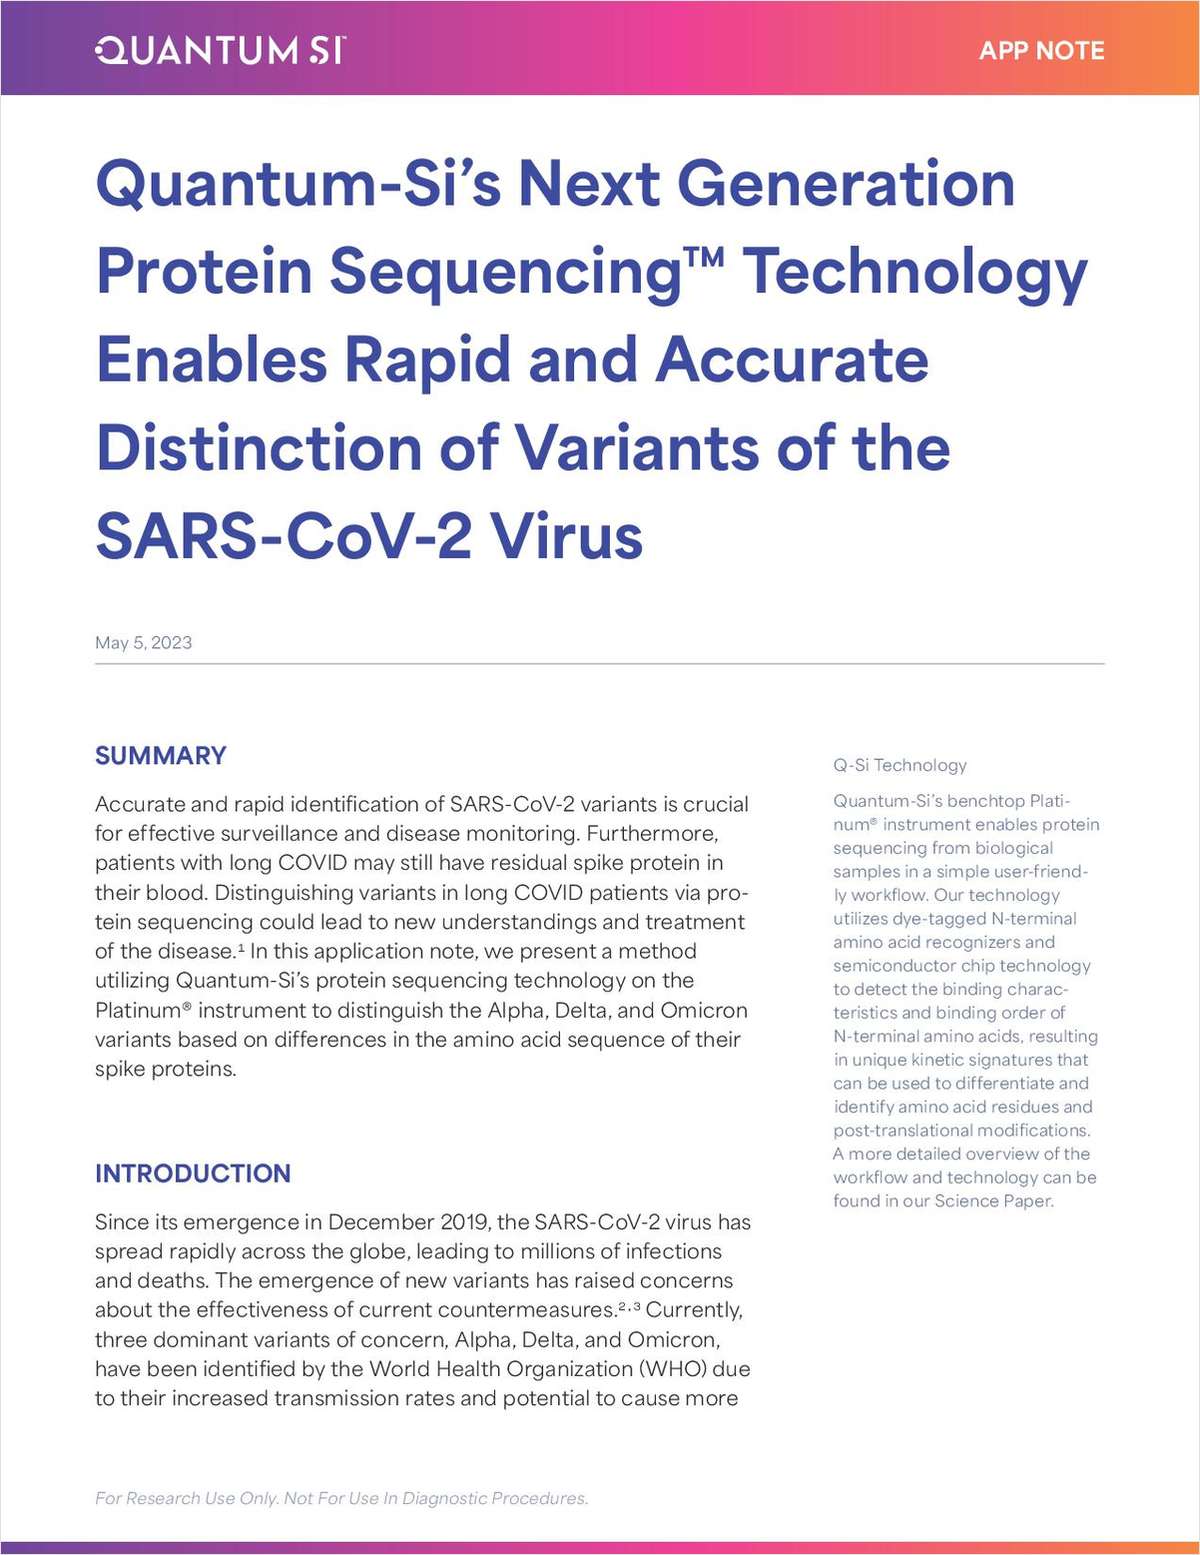 Quantum-Si's Next-Generation Protein Sequencing Technology Enables Rapid and Accurate Distinction of Variants of the SARS-CoV-2 Virus